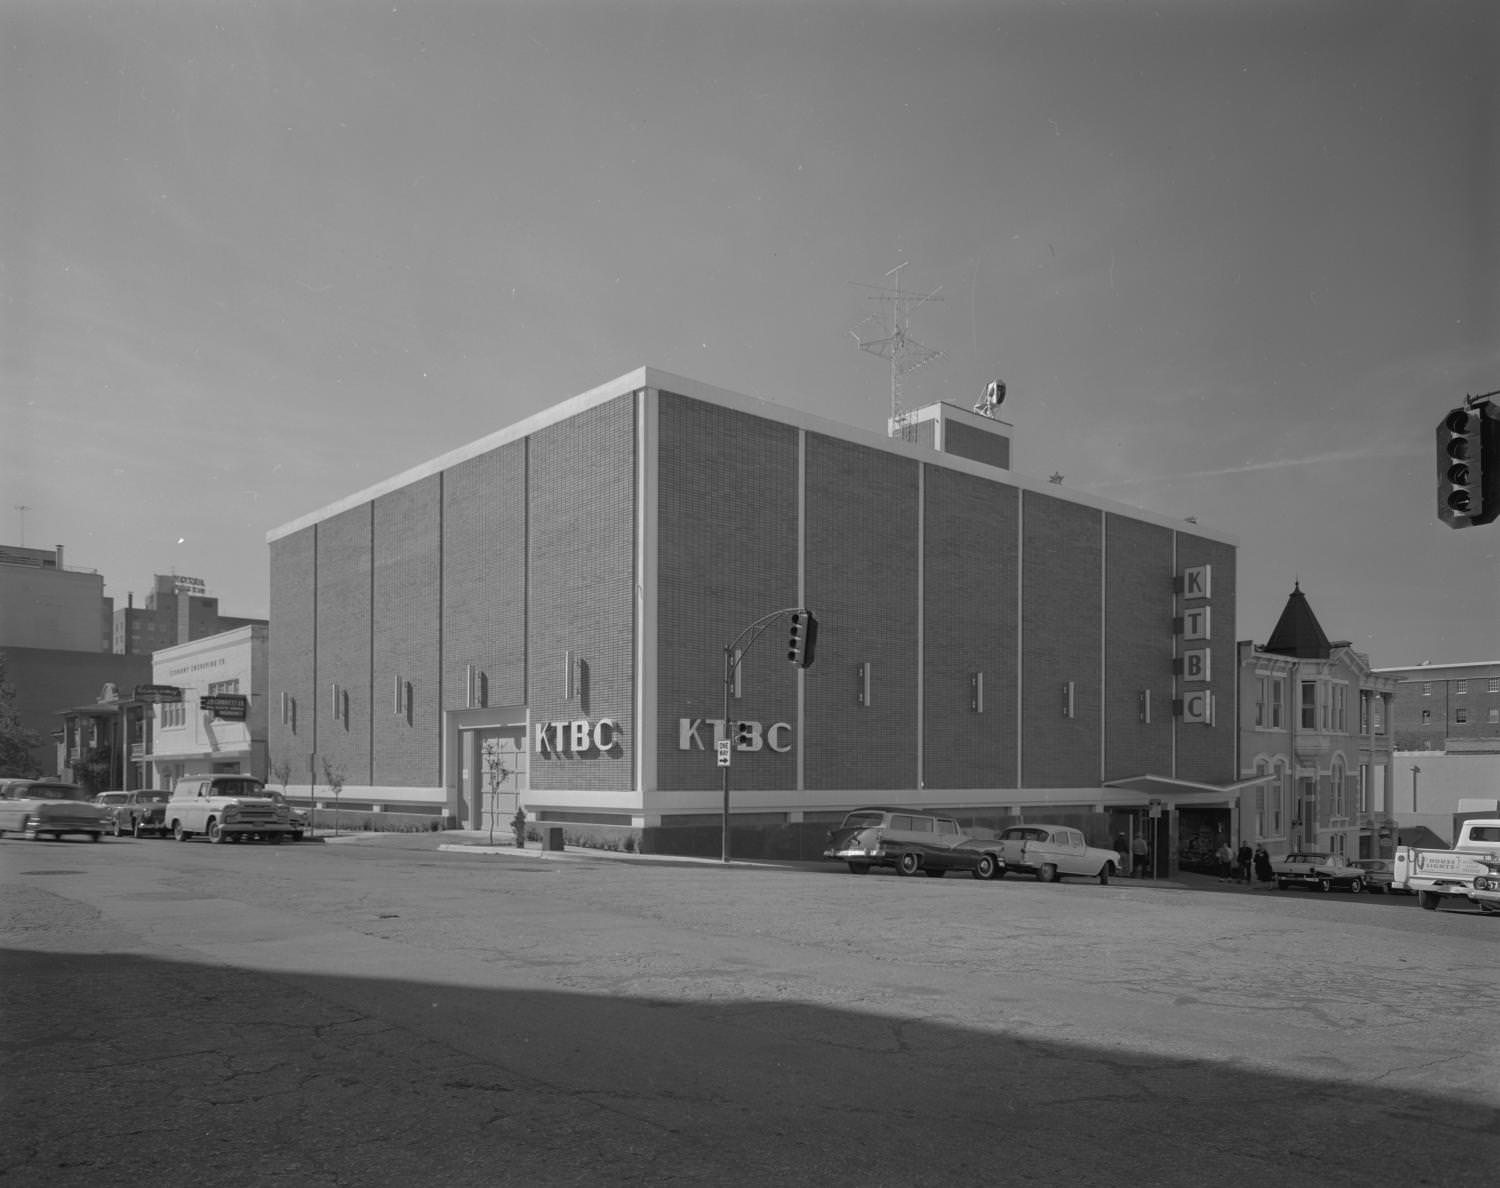 KTBC Studio on a street corner with traffic lights for an intersection seen in the foreground, and cars seen both driving and parked on each street, Austin, 1960